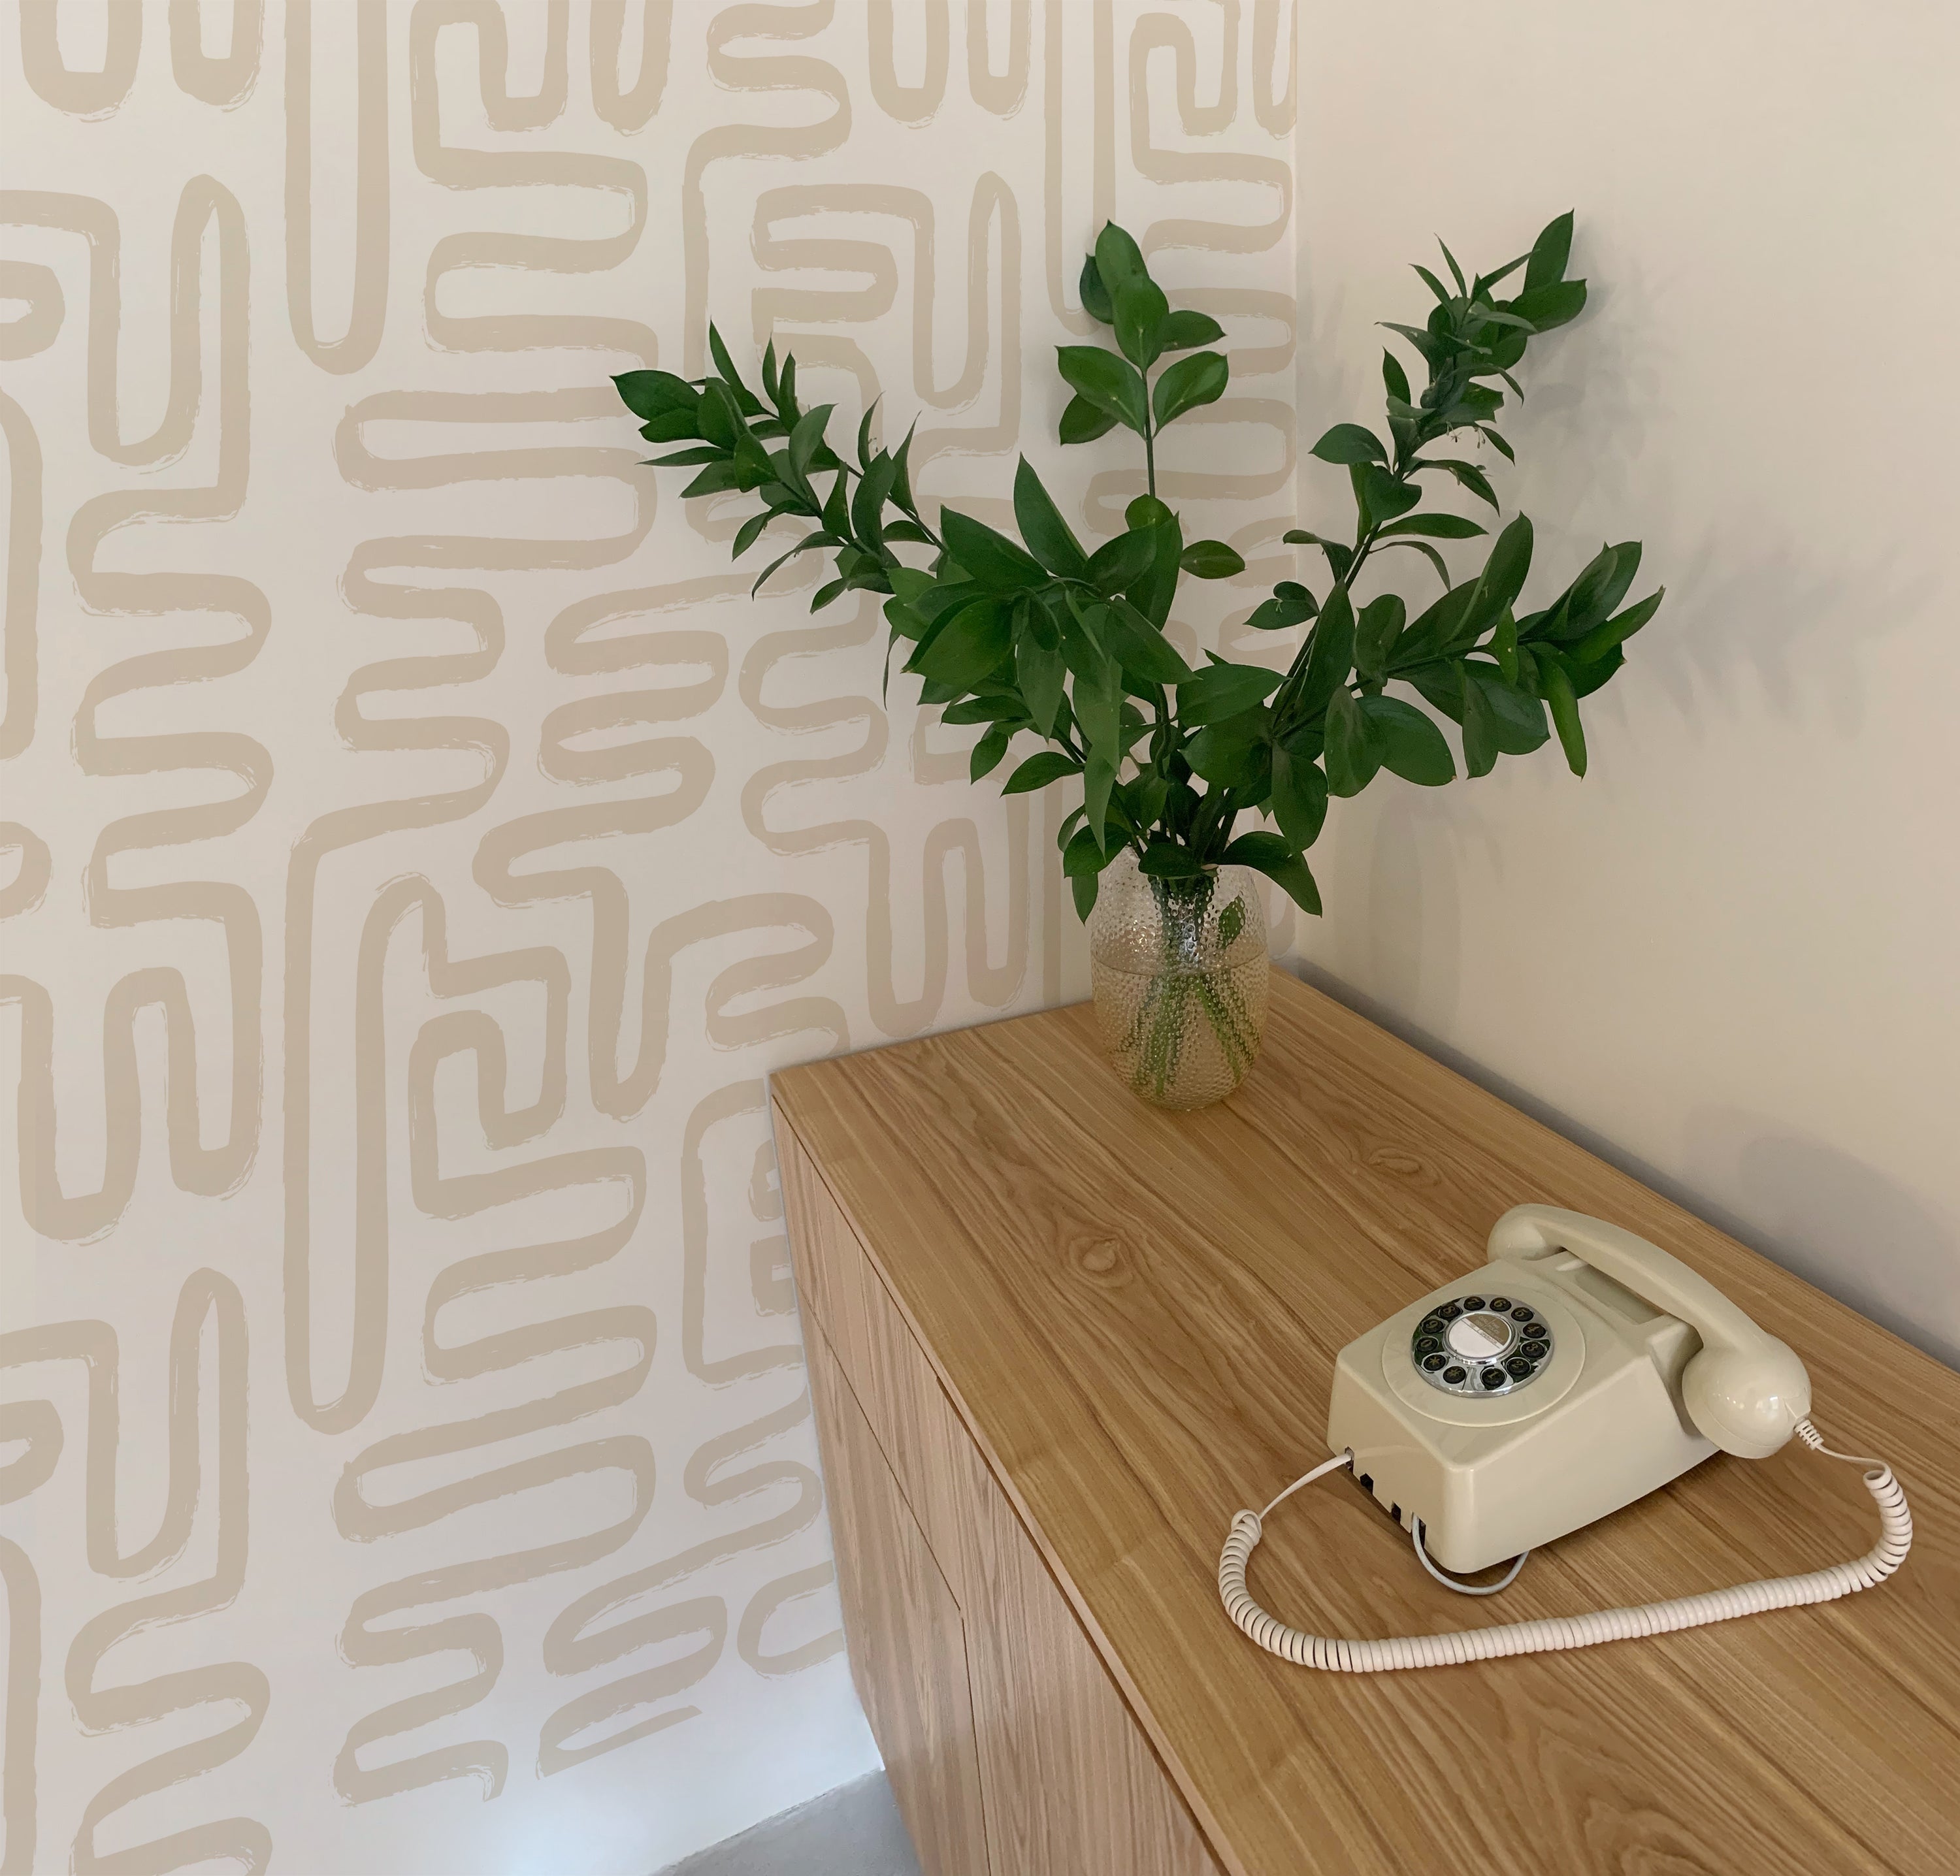 A snapshot of a modern, understated corner with clean lines, featuring the ecru geometric wallpaper. A vintage telephone on a light wood console table and a green leafy branch in a clear vase add a touch of retro charm.